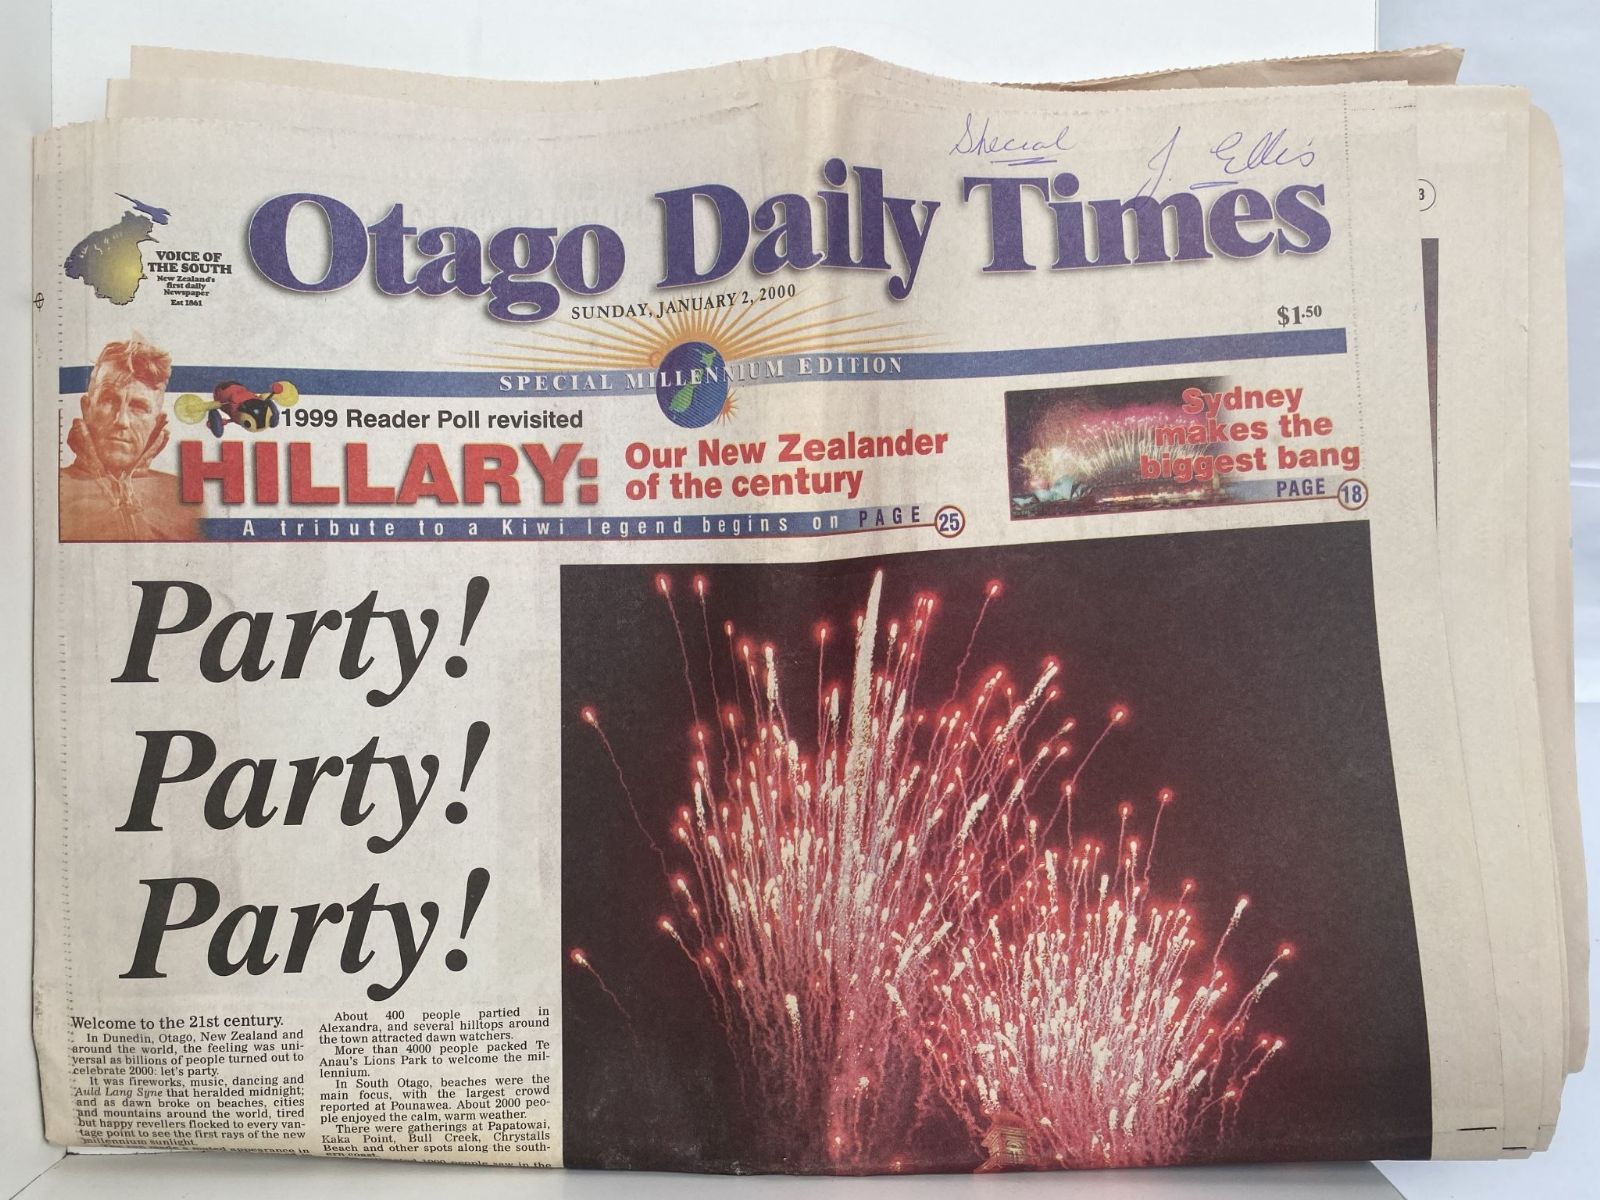 OLD NEWSPAPER: The Otago Daily Times, 2 January 2000 - first of new millennium